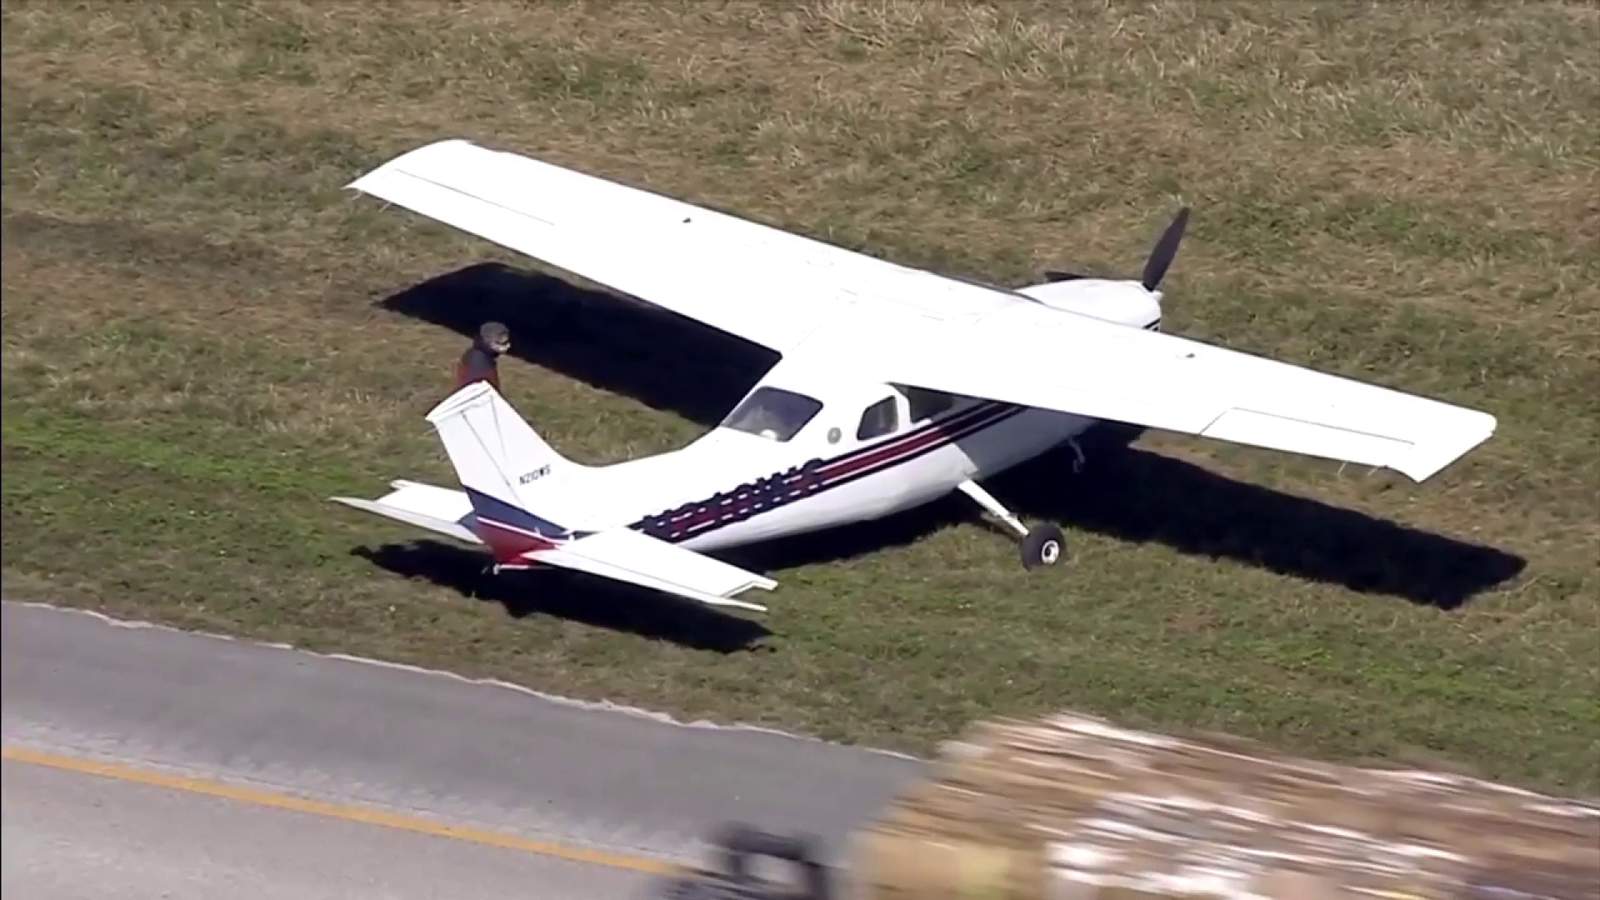 Pilot en route to Key West lands small plane on I-75 in Broward County